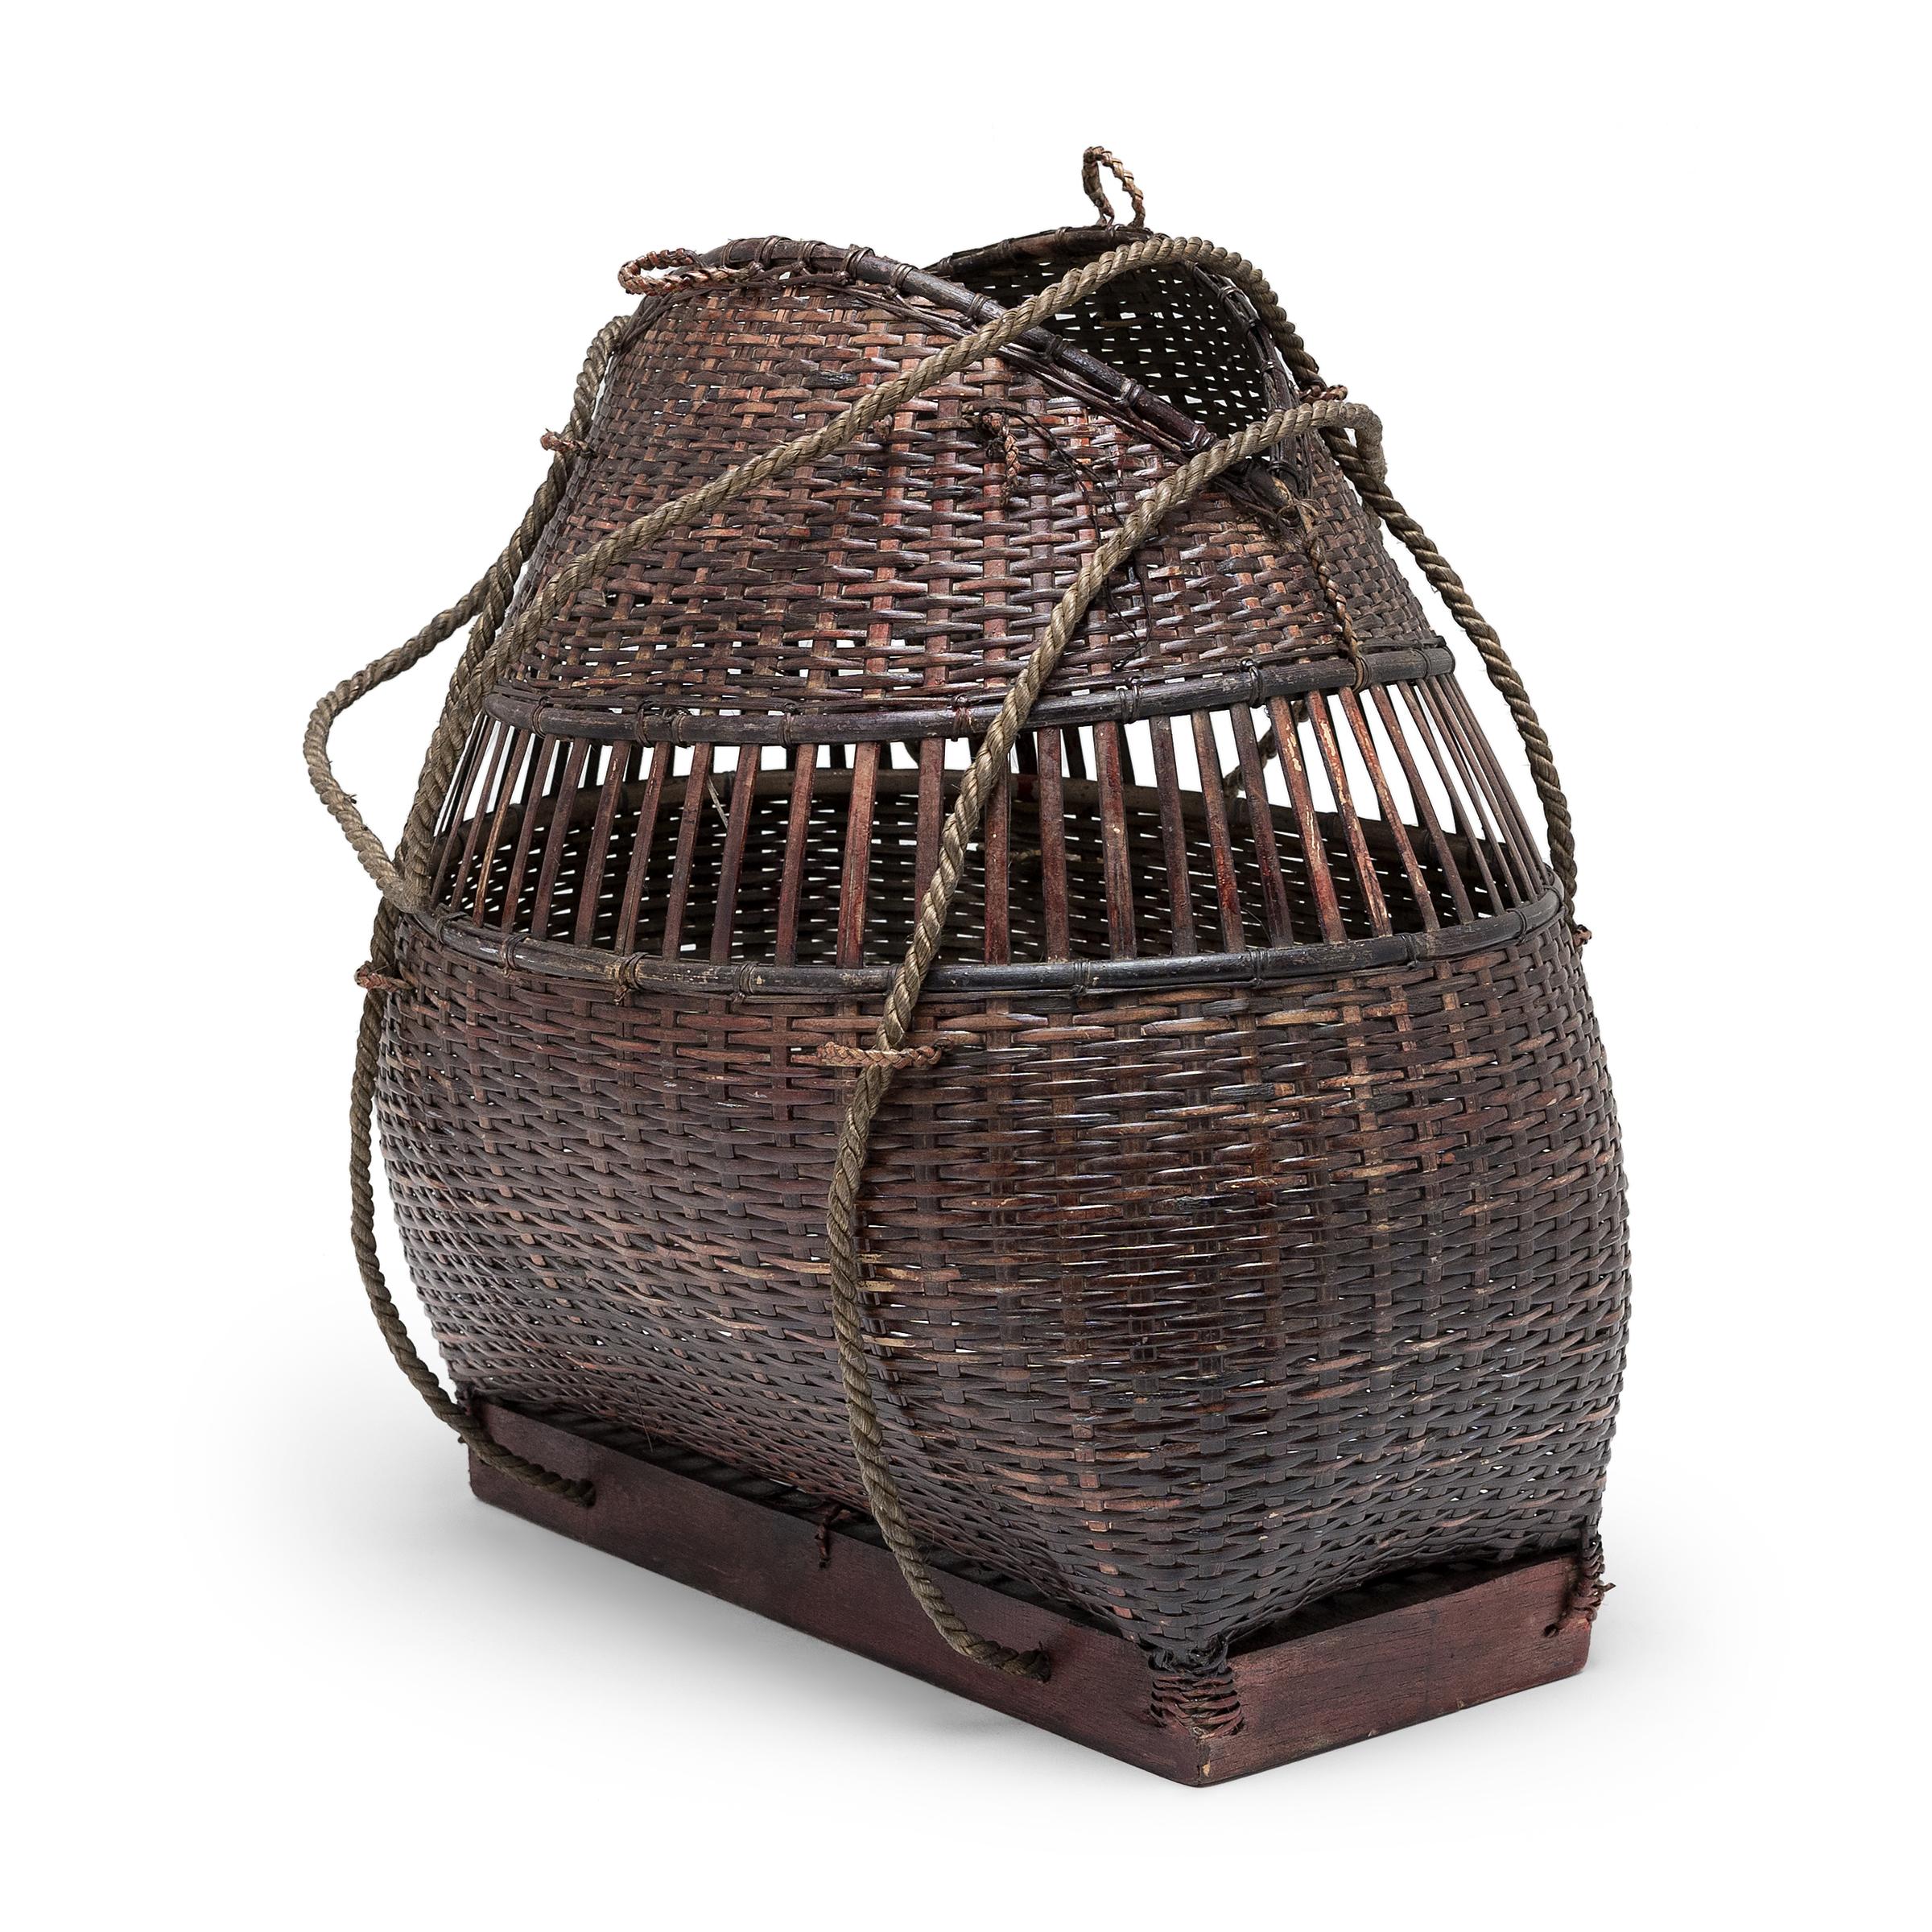 This smoky brown carrying basket originates from southeast Asia and is expertly crafted of thin strips of smoked bamboo. Carefully hand-woven in a plain weave with a band of exposed warp, the basket wonderfully showcases the artisan's mastery of